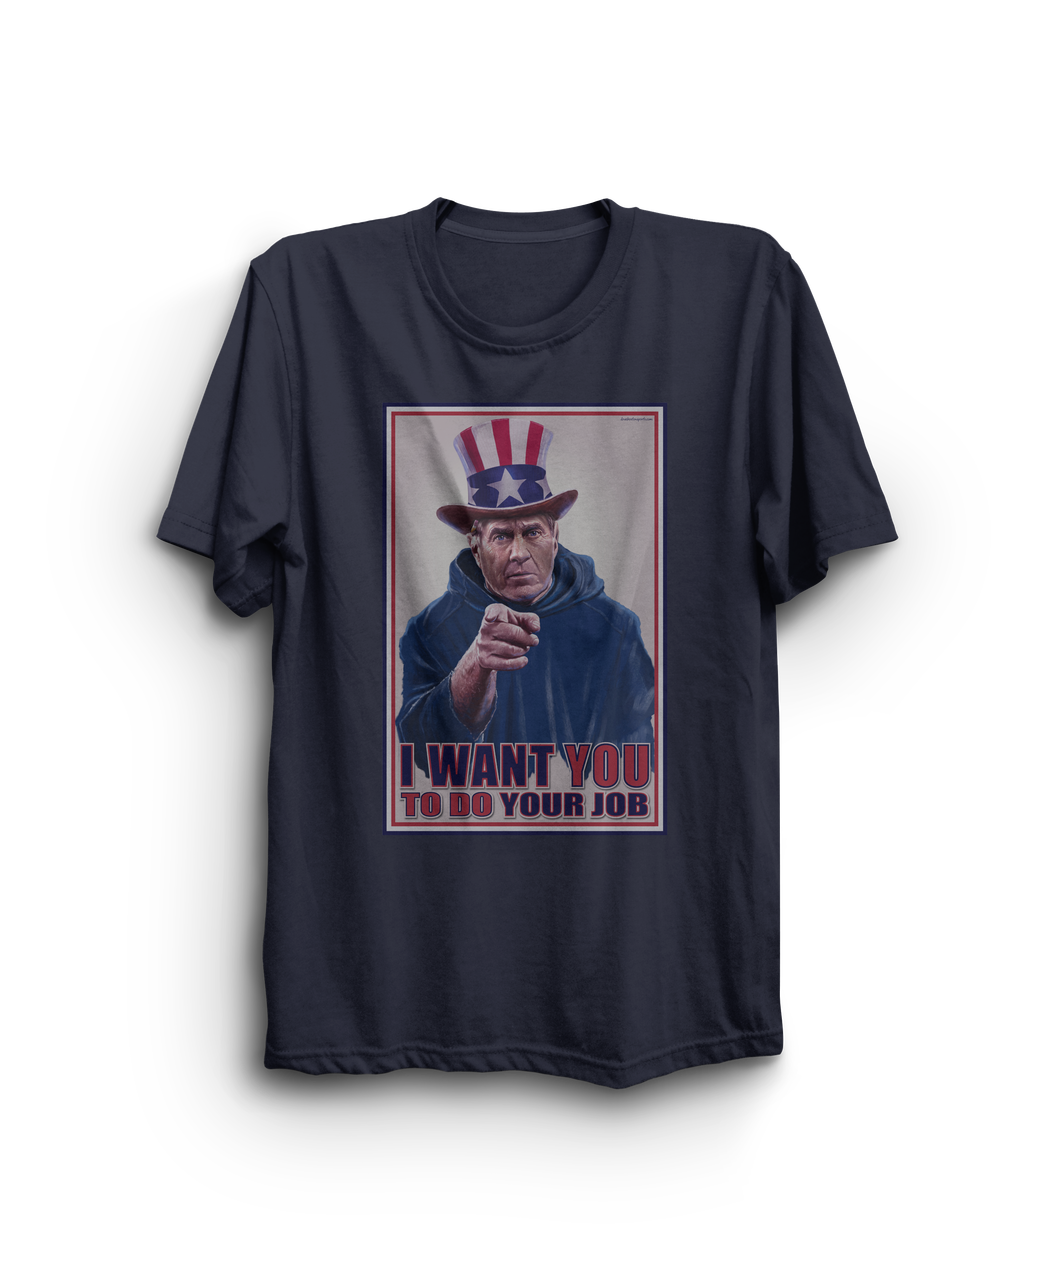 Uncle Bill Wants You! Do Your Job Navy T-Shirt